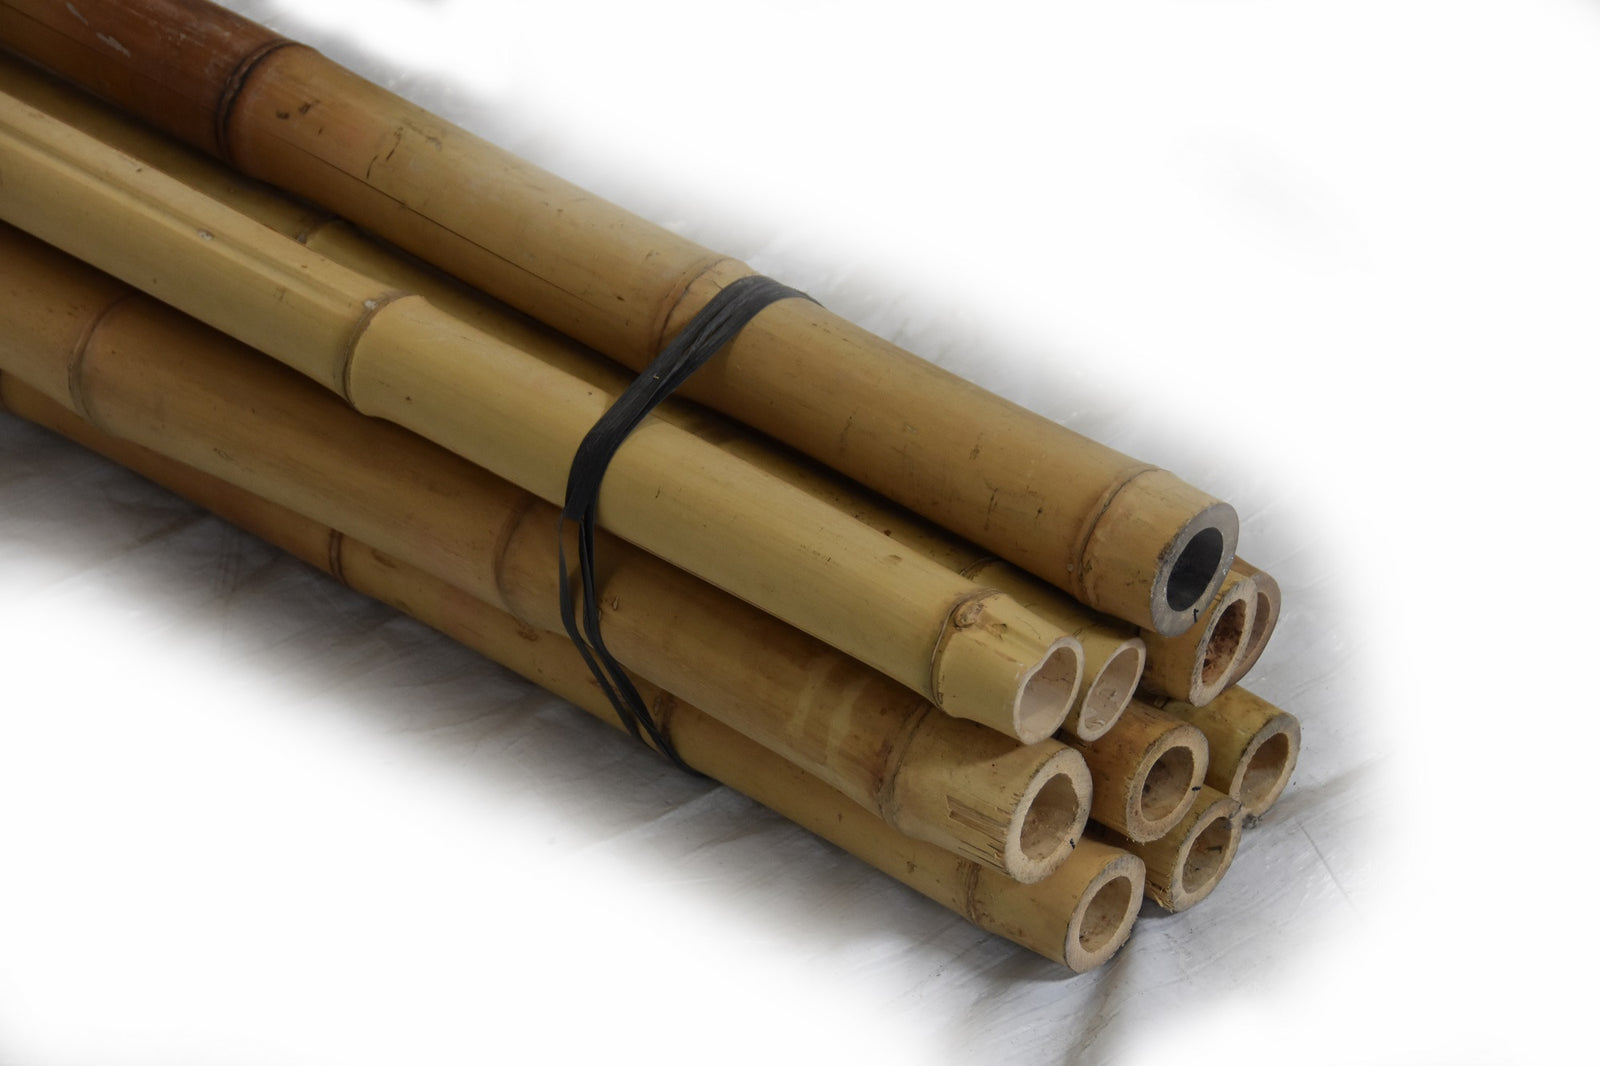 Wholesale Bamboo Rods - Buy Reliable Bamboo Rods from